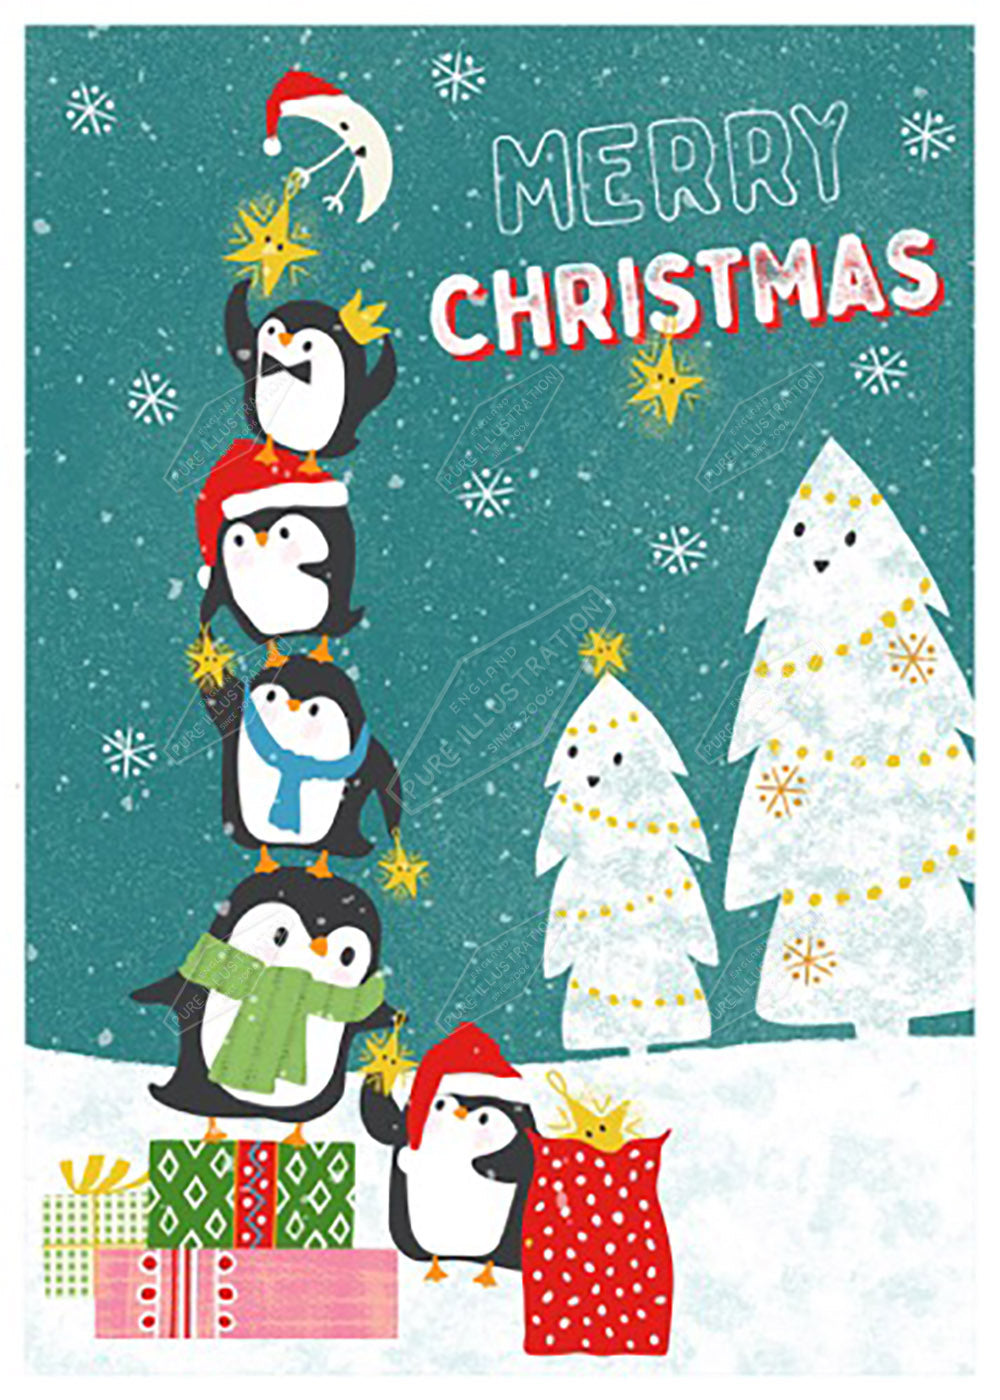 Christmas Penguin Party Design by Gill Eggleston for Pure Art Licensing Agency & Surface Design Studio